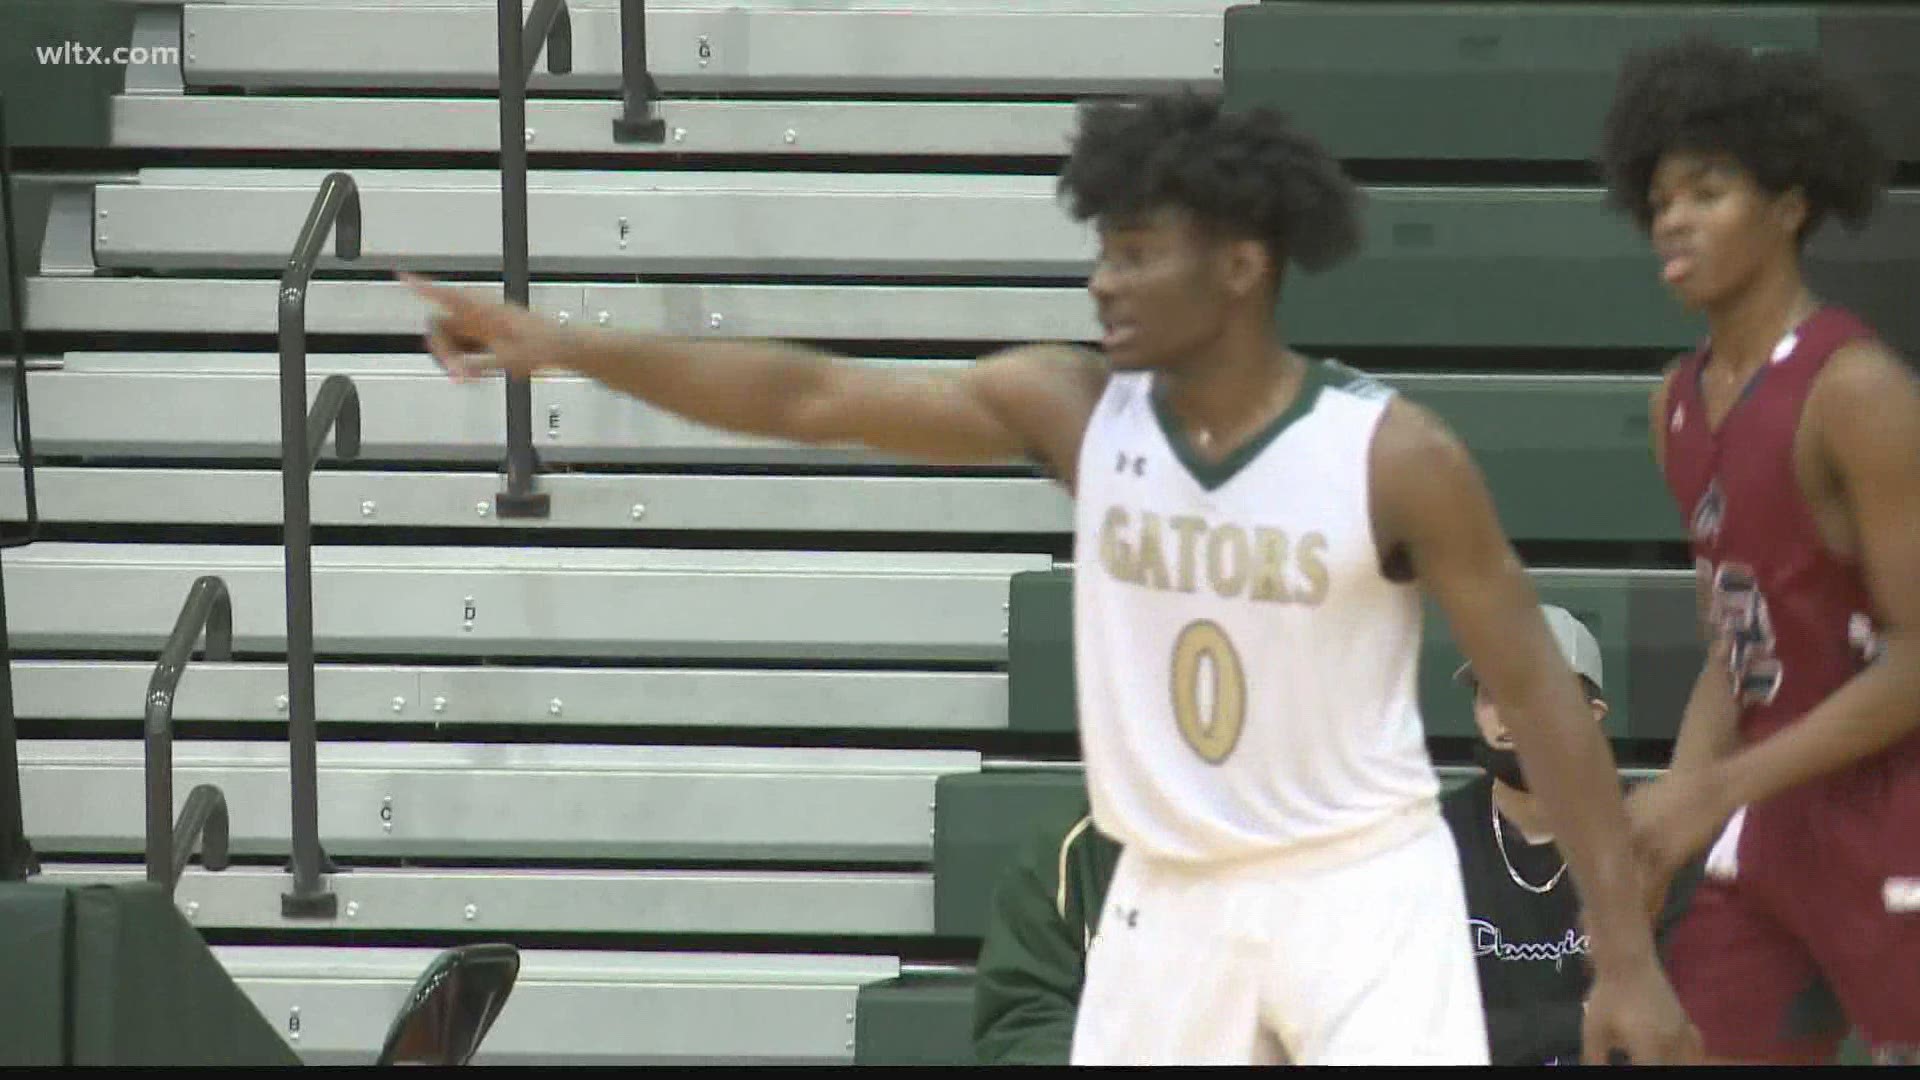 River Bluff senior Myles Jenkins continues to set the tone for Gator hoops.